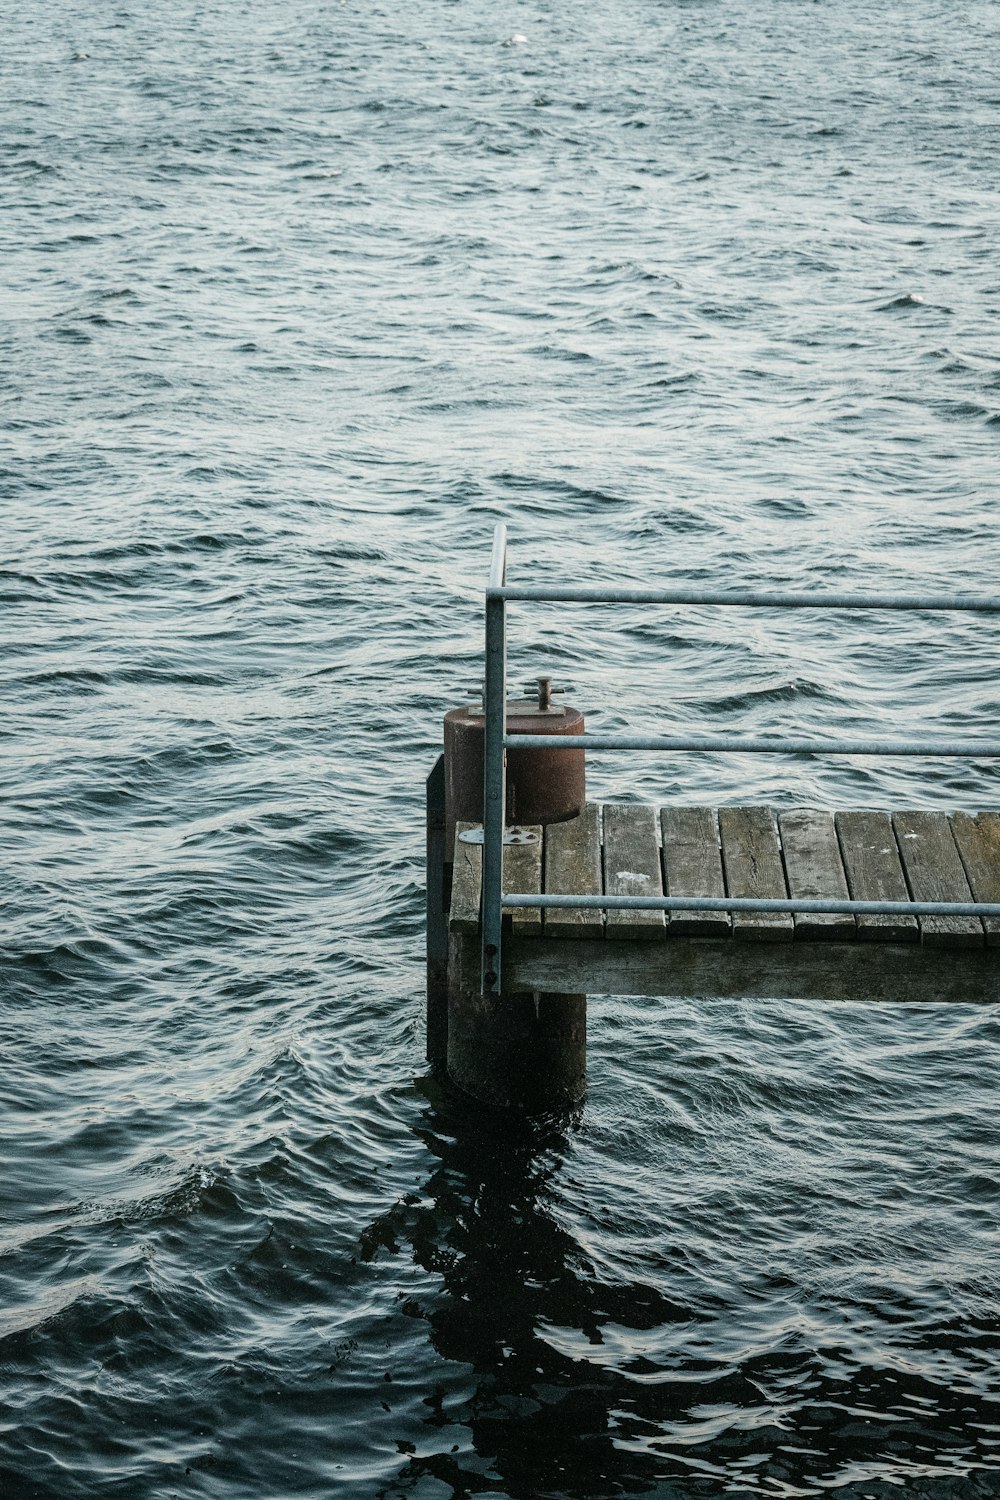 a wooden dock in the middle of a body of water